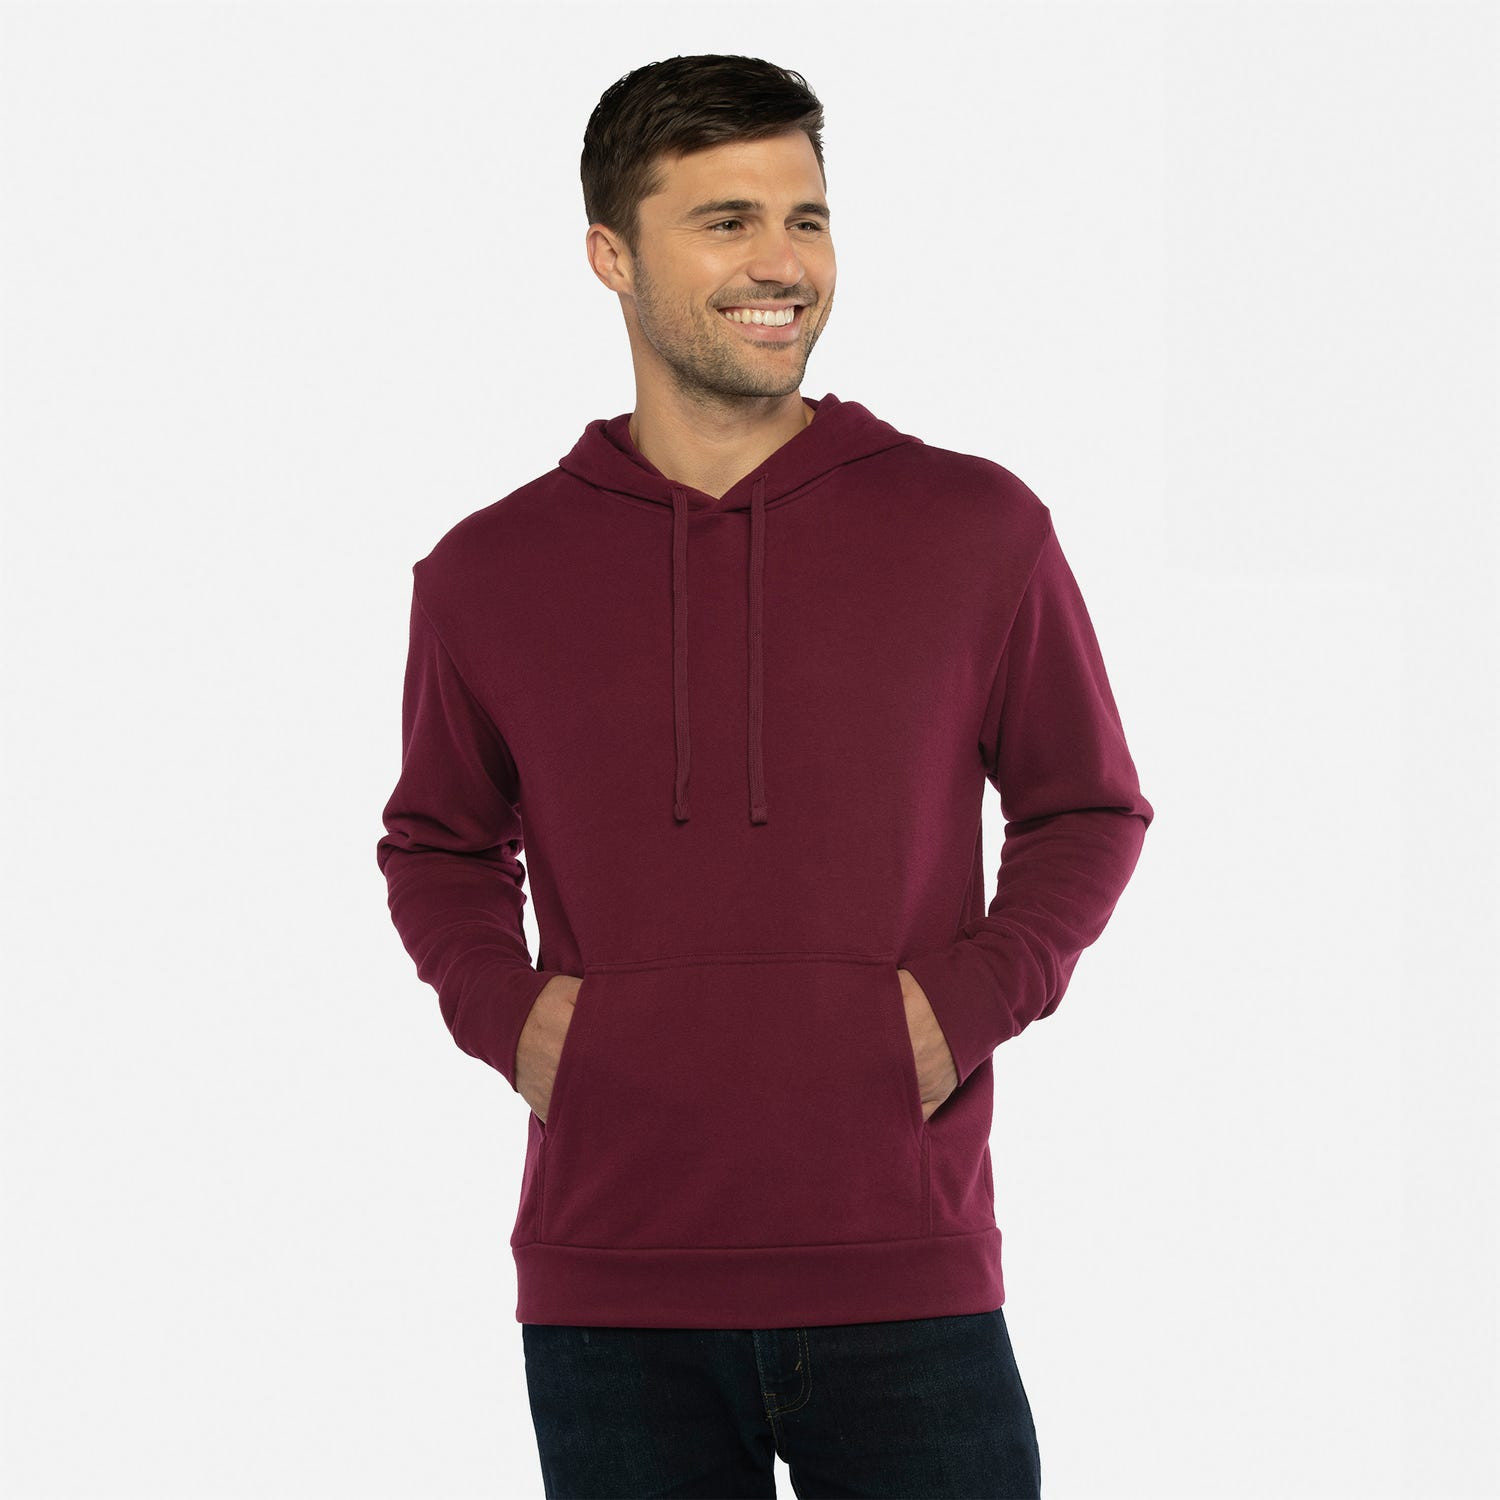 Next Level 9304 Sueded French Terry Pullover Sweatshirt